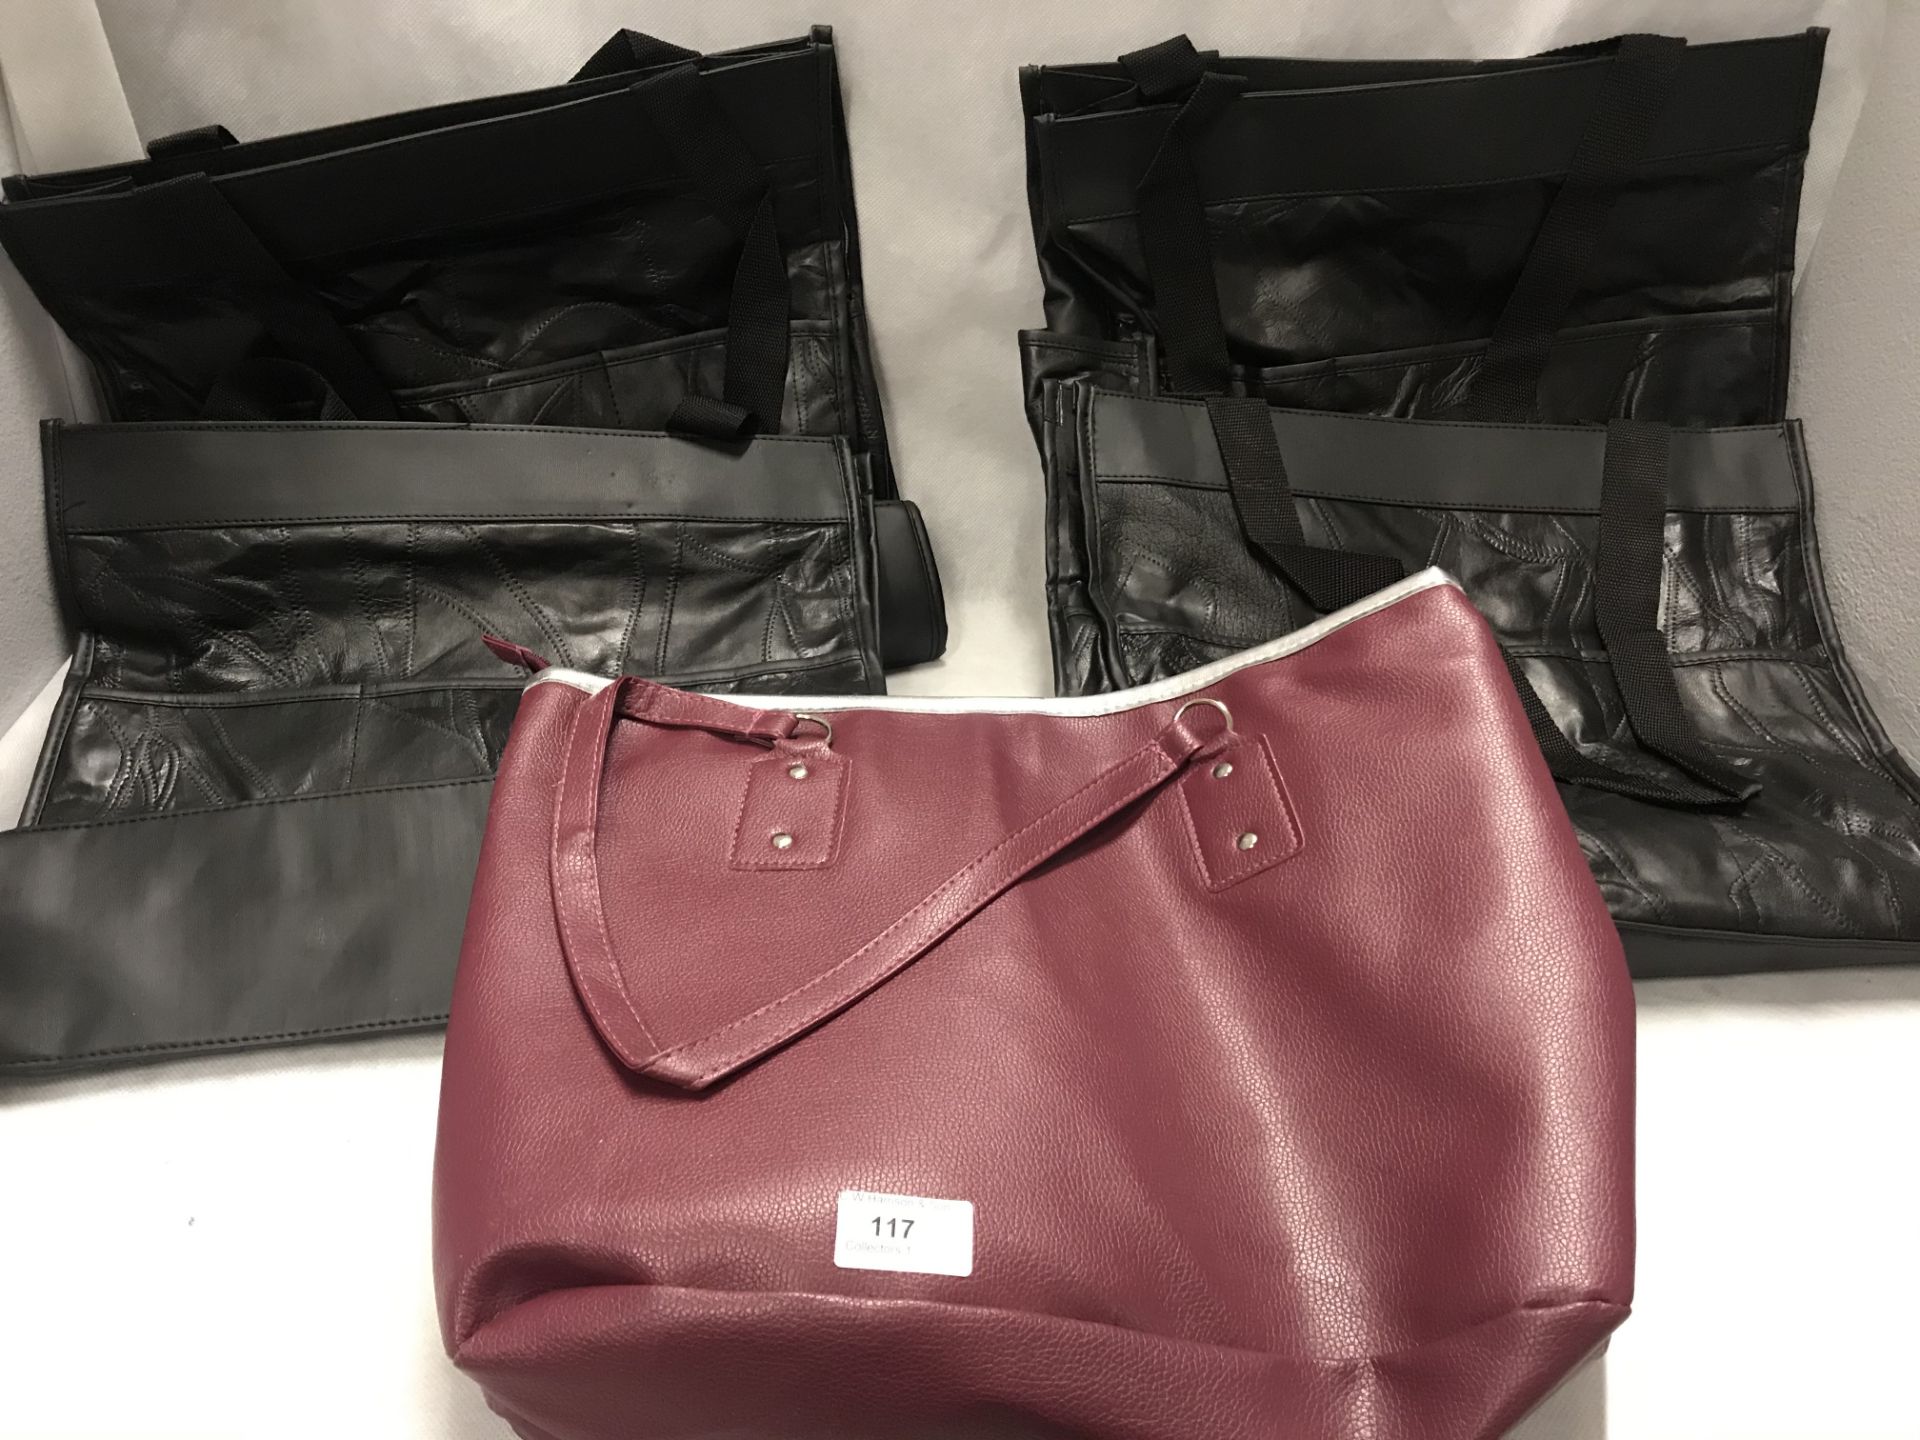 4 x ladies black handbags with umbrellas inside and one other in burgundy non-matching (5)